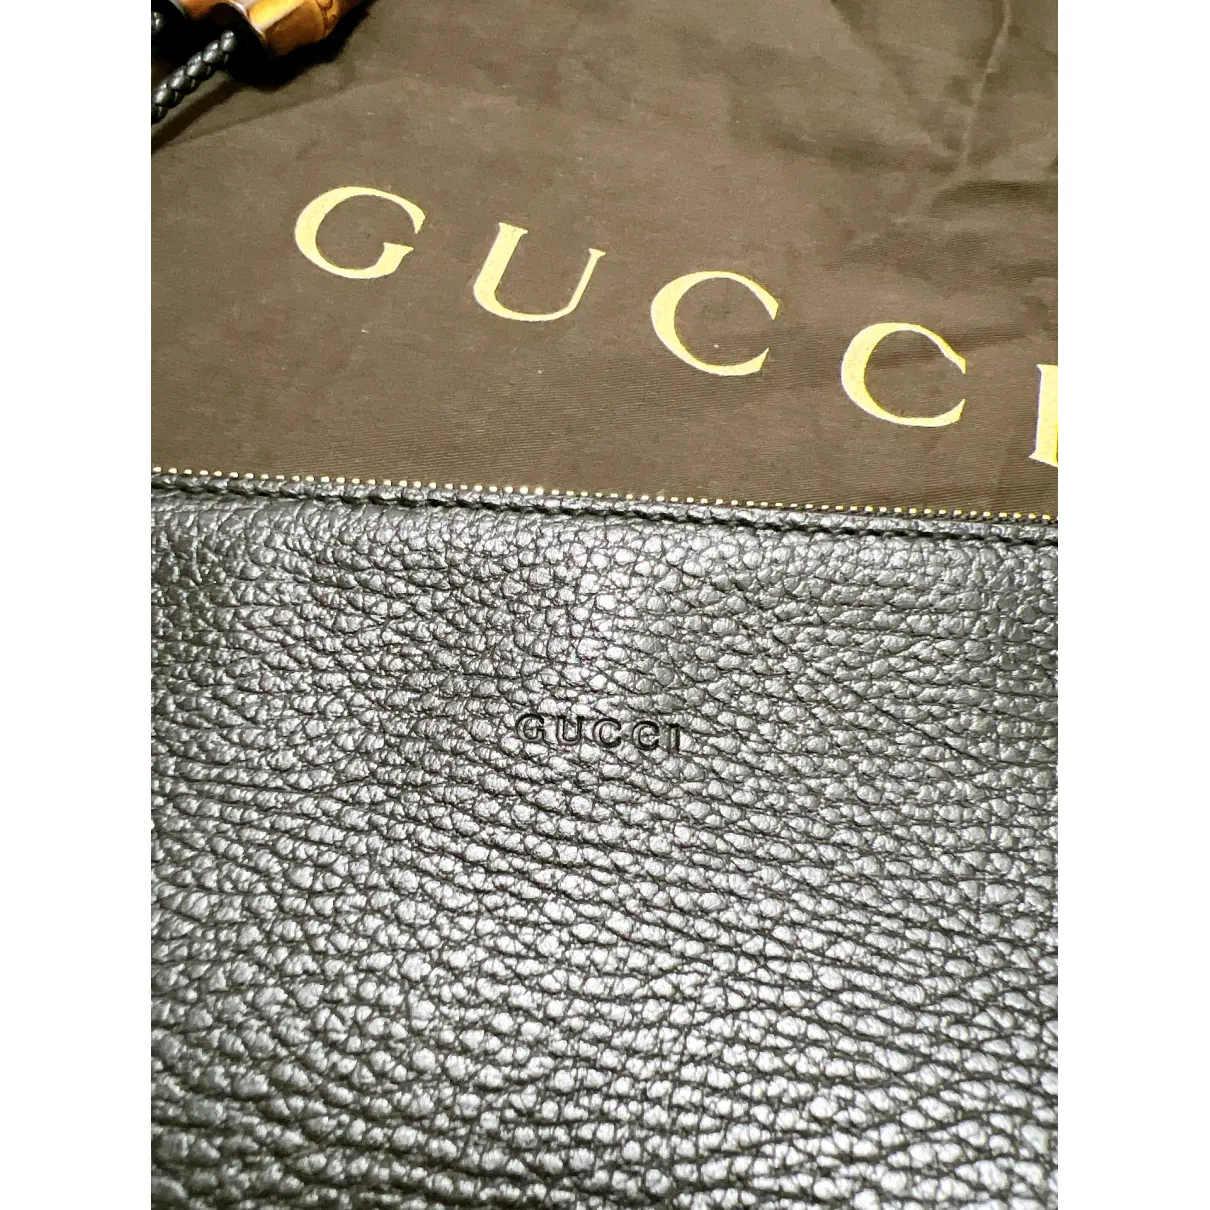 Buy Gucci Soho leather clutch bag online